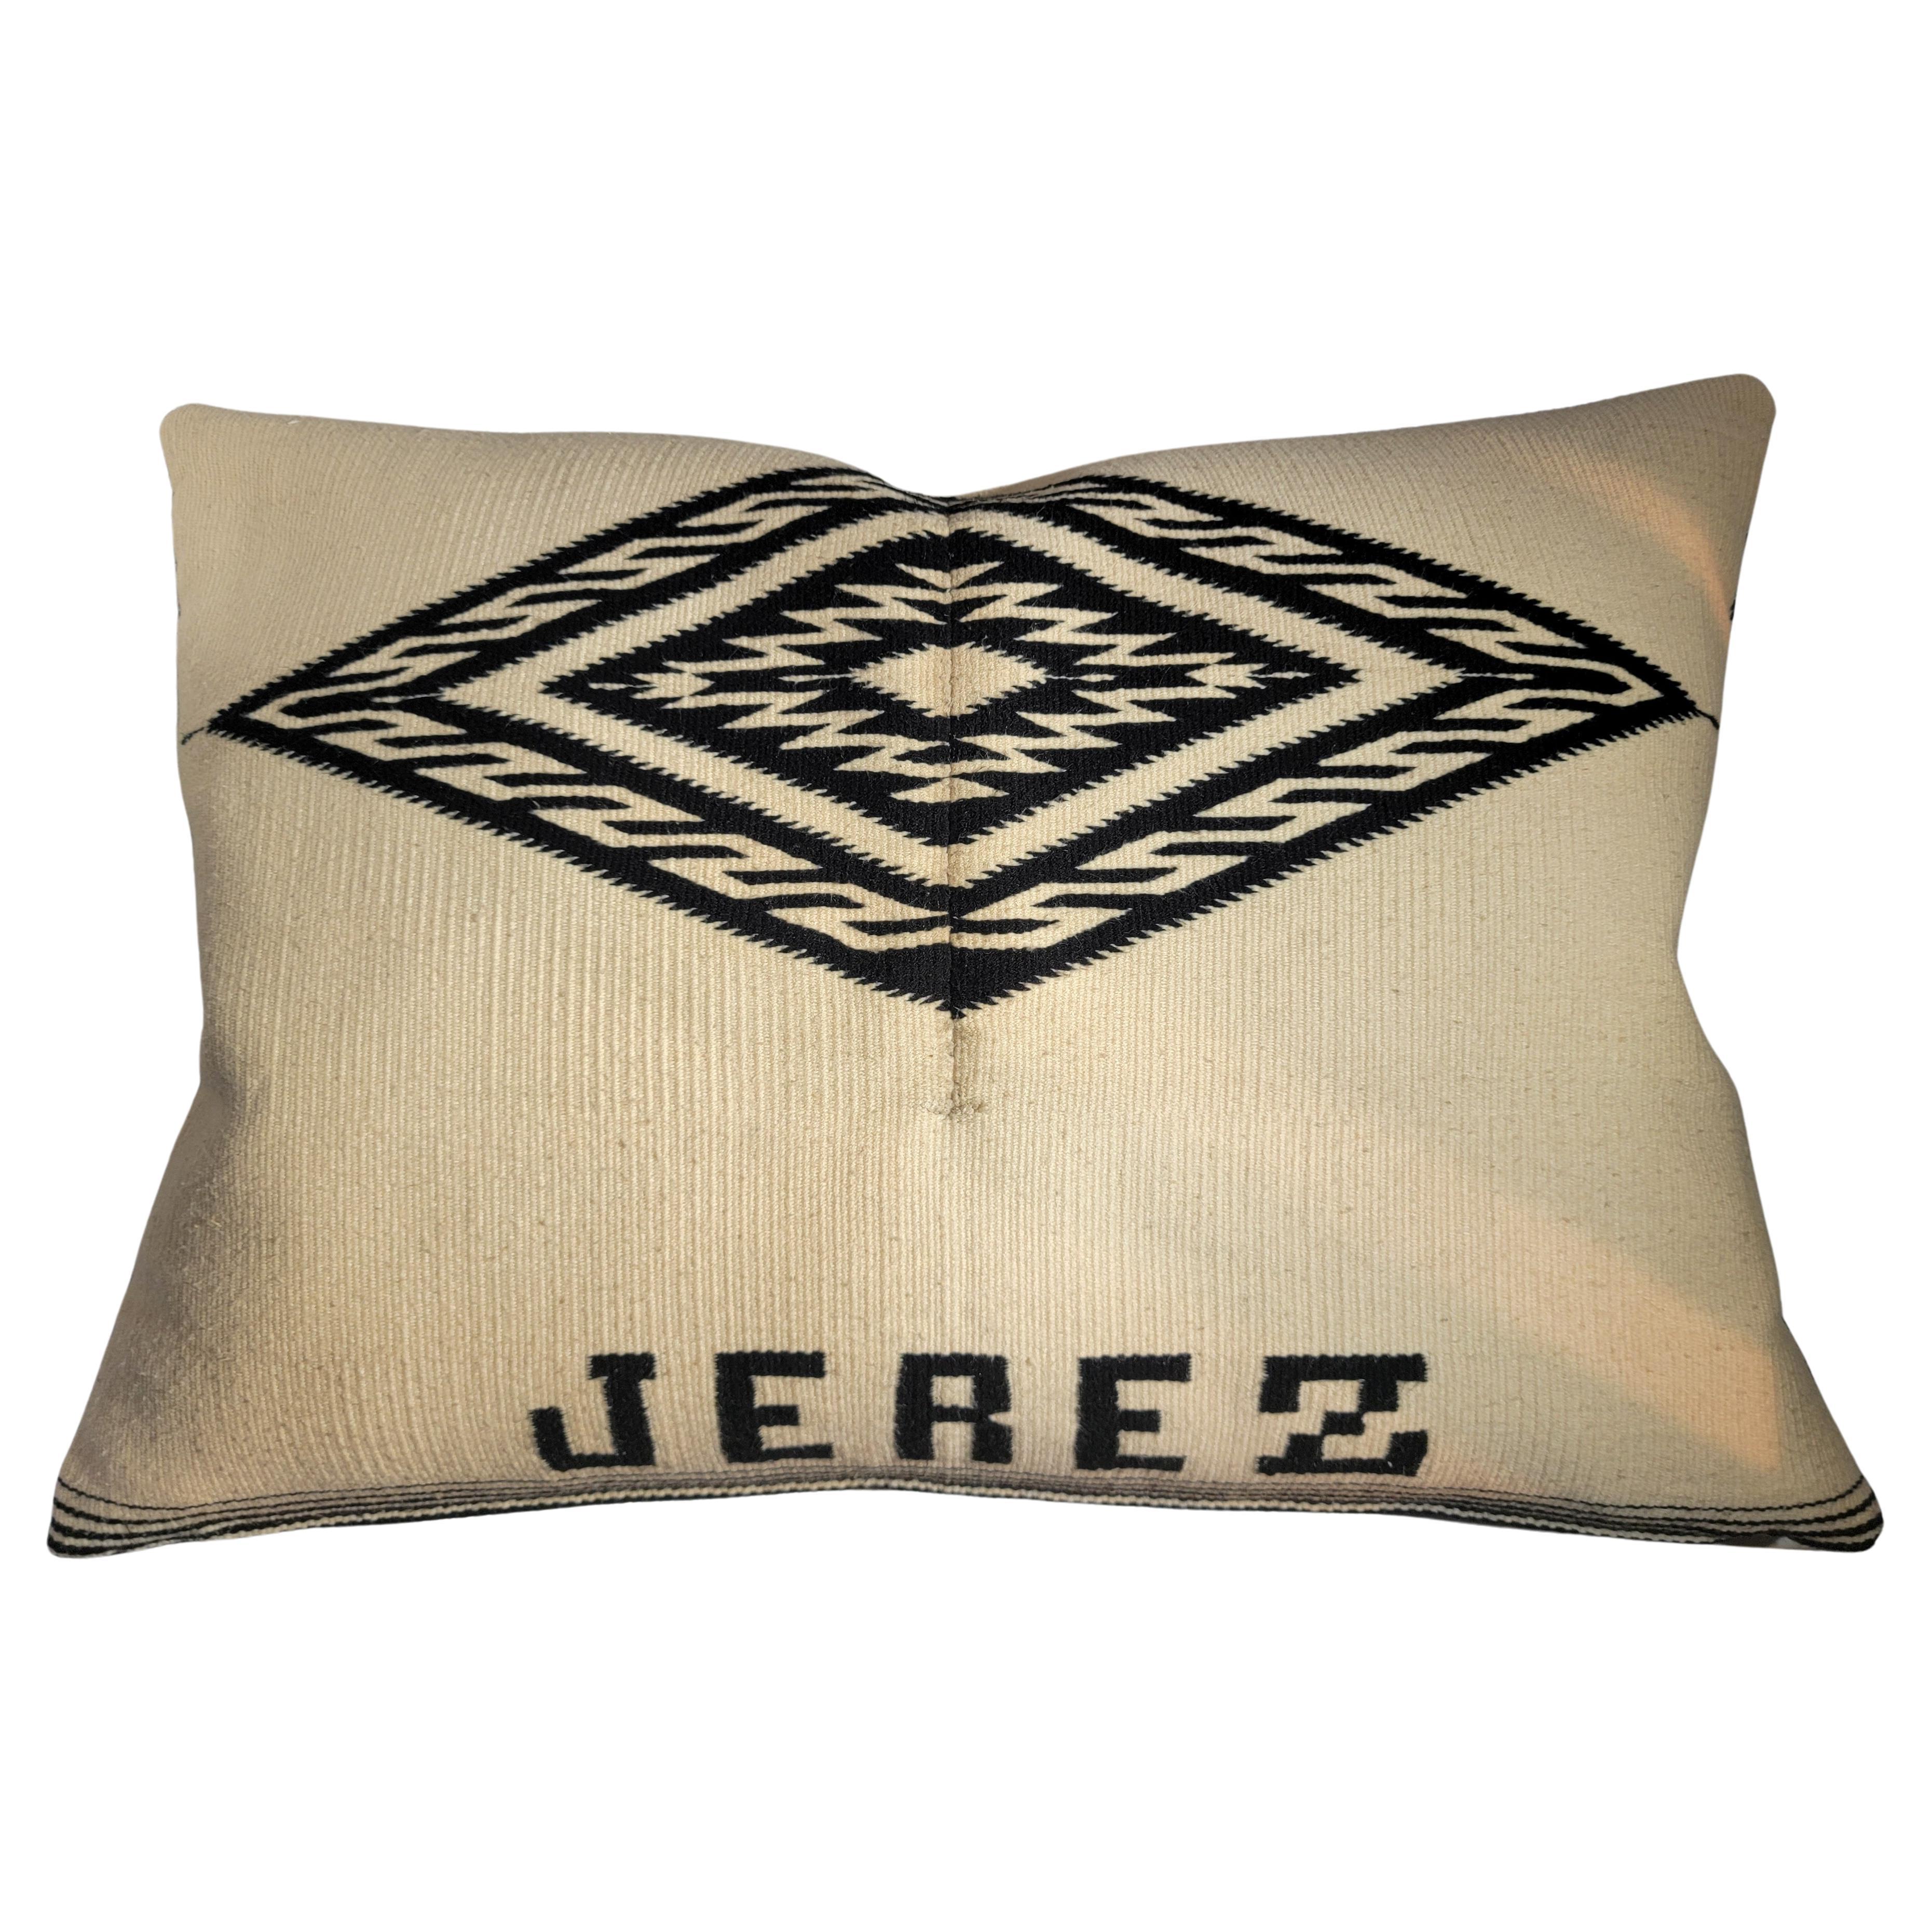 1960s Mexican Indian Weaving Pillow " Jerez" For Sale